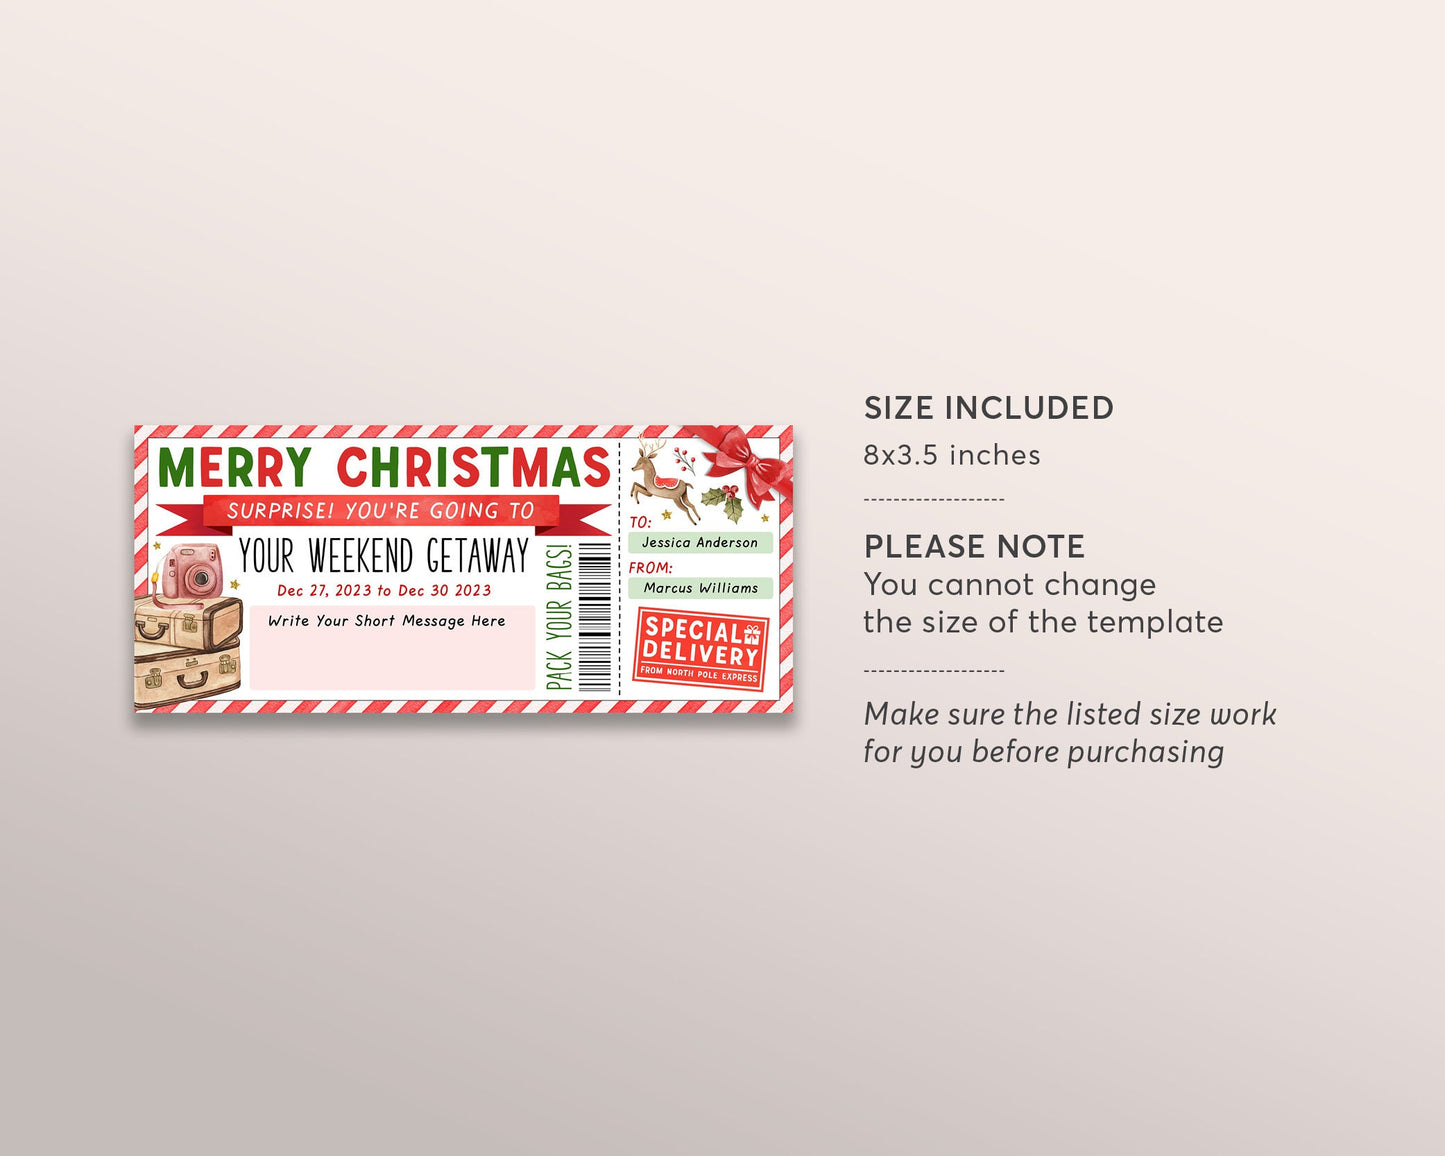 Christmas Weekend Getaway Voucher Editable Template, Surprise Vacation Travel Ticket Gift Certificate Pack Your Bags Holiday Trip Staycation